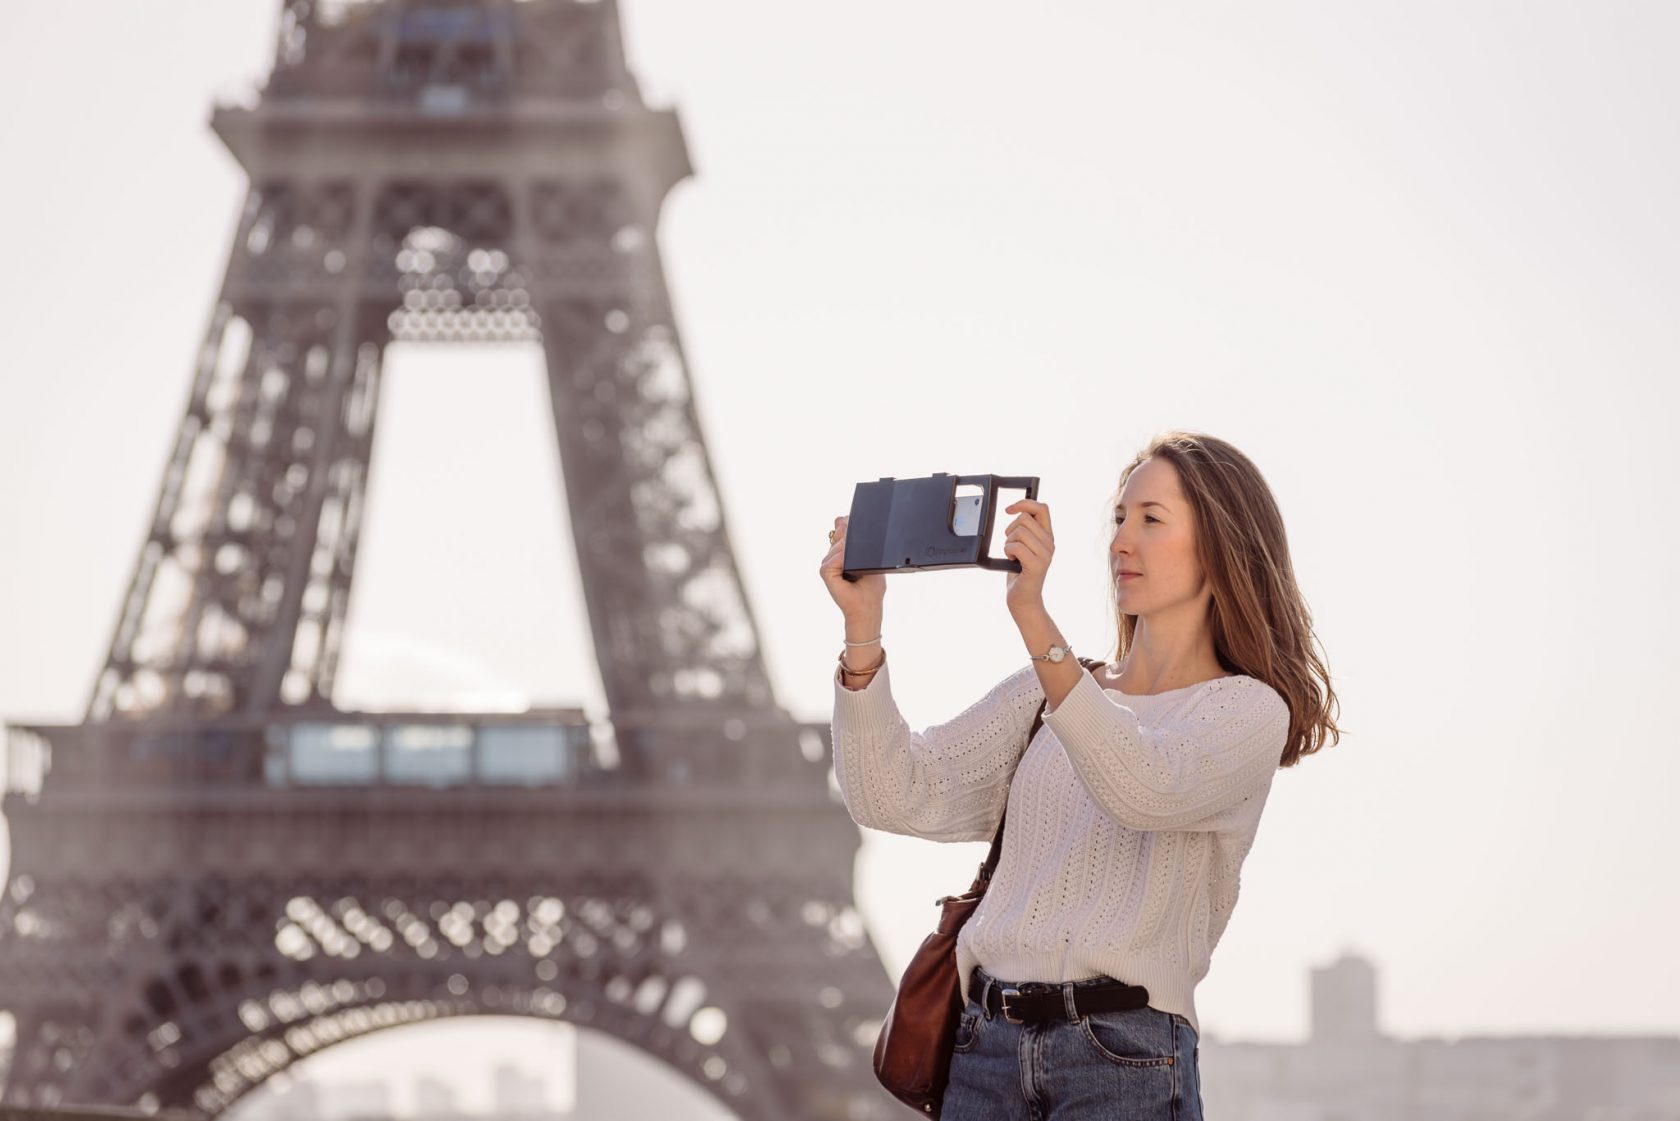 lifestyle product photoshoot in Paris France for iOgrapher, model in front of the Eiffel tower holding iPhone filming case